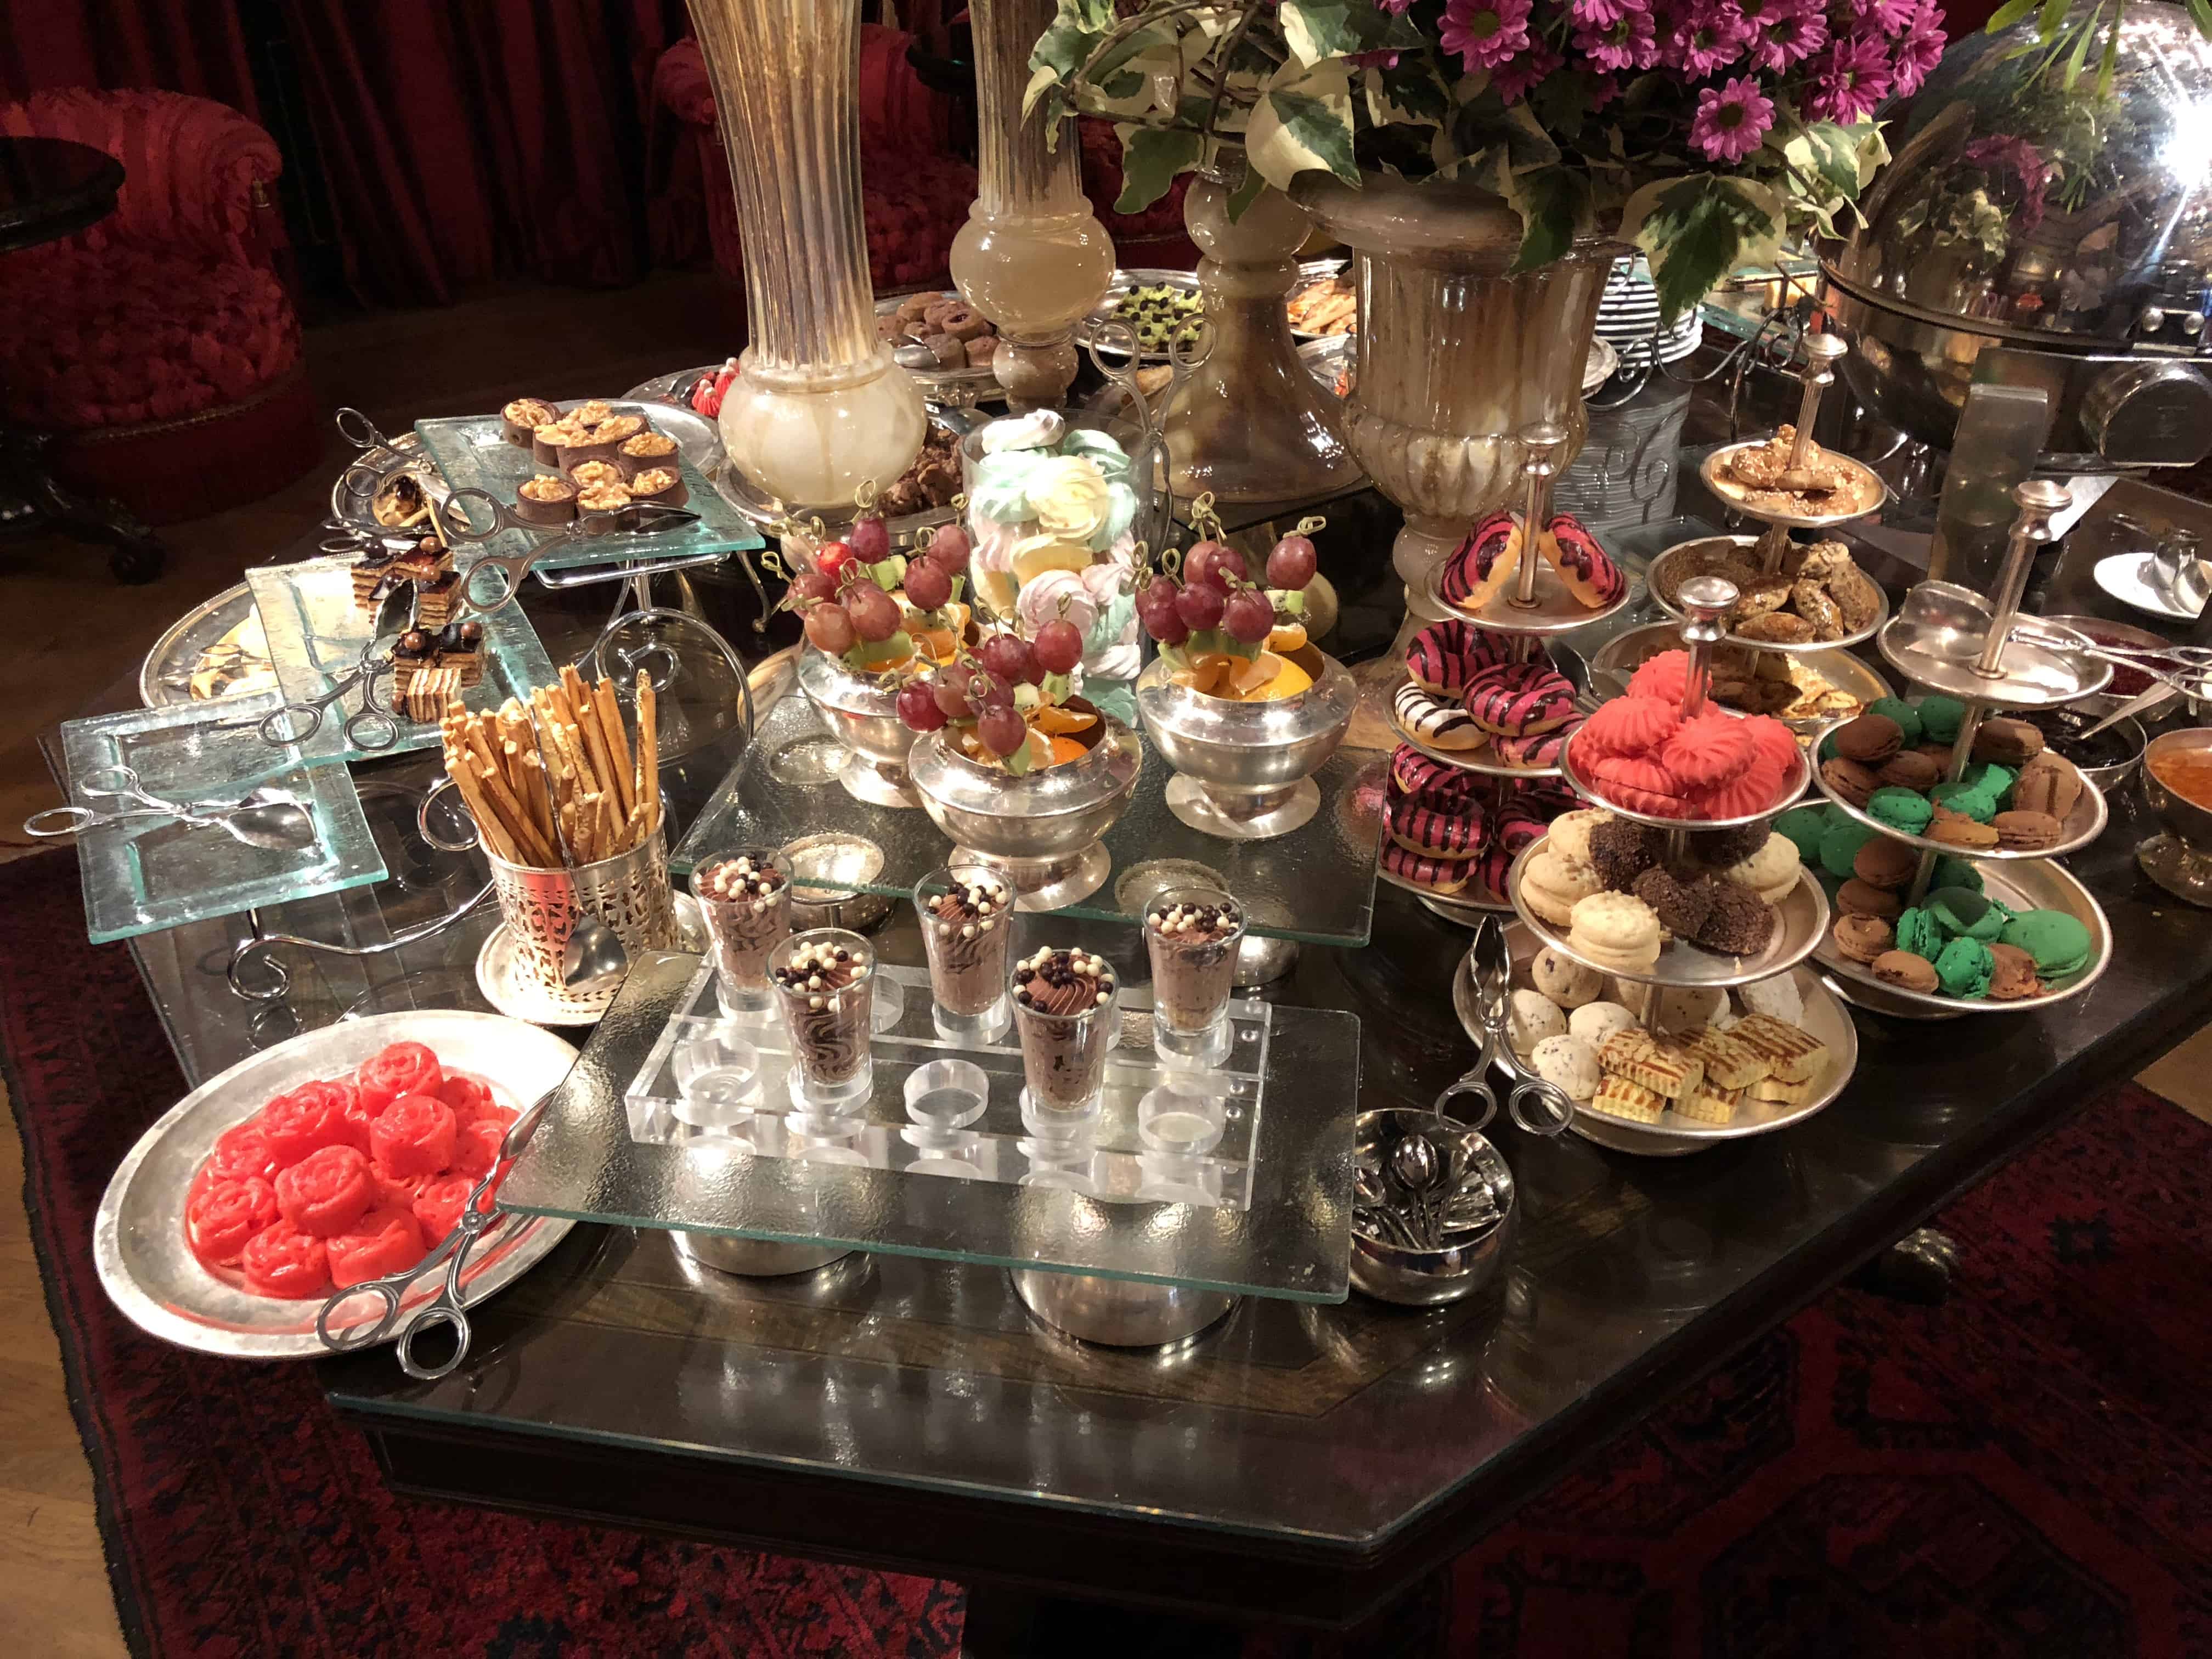 English afternoon tea at the Pera Palace Hotel in Istanbul, Turkey